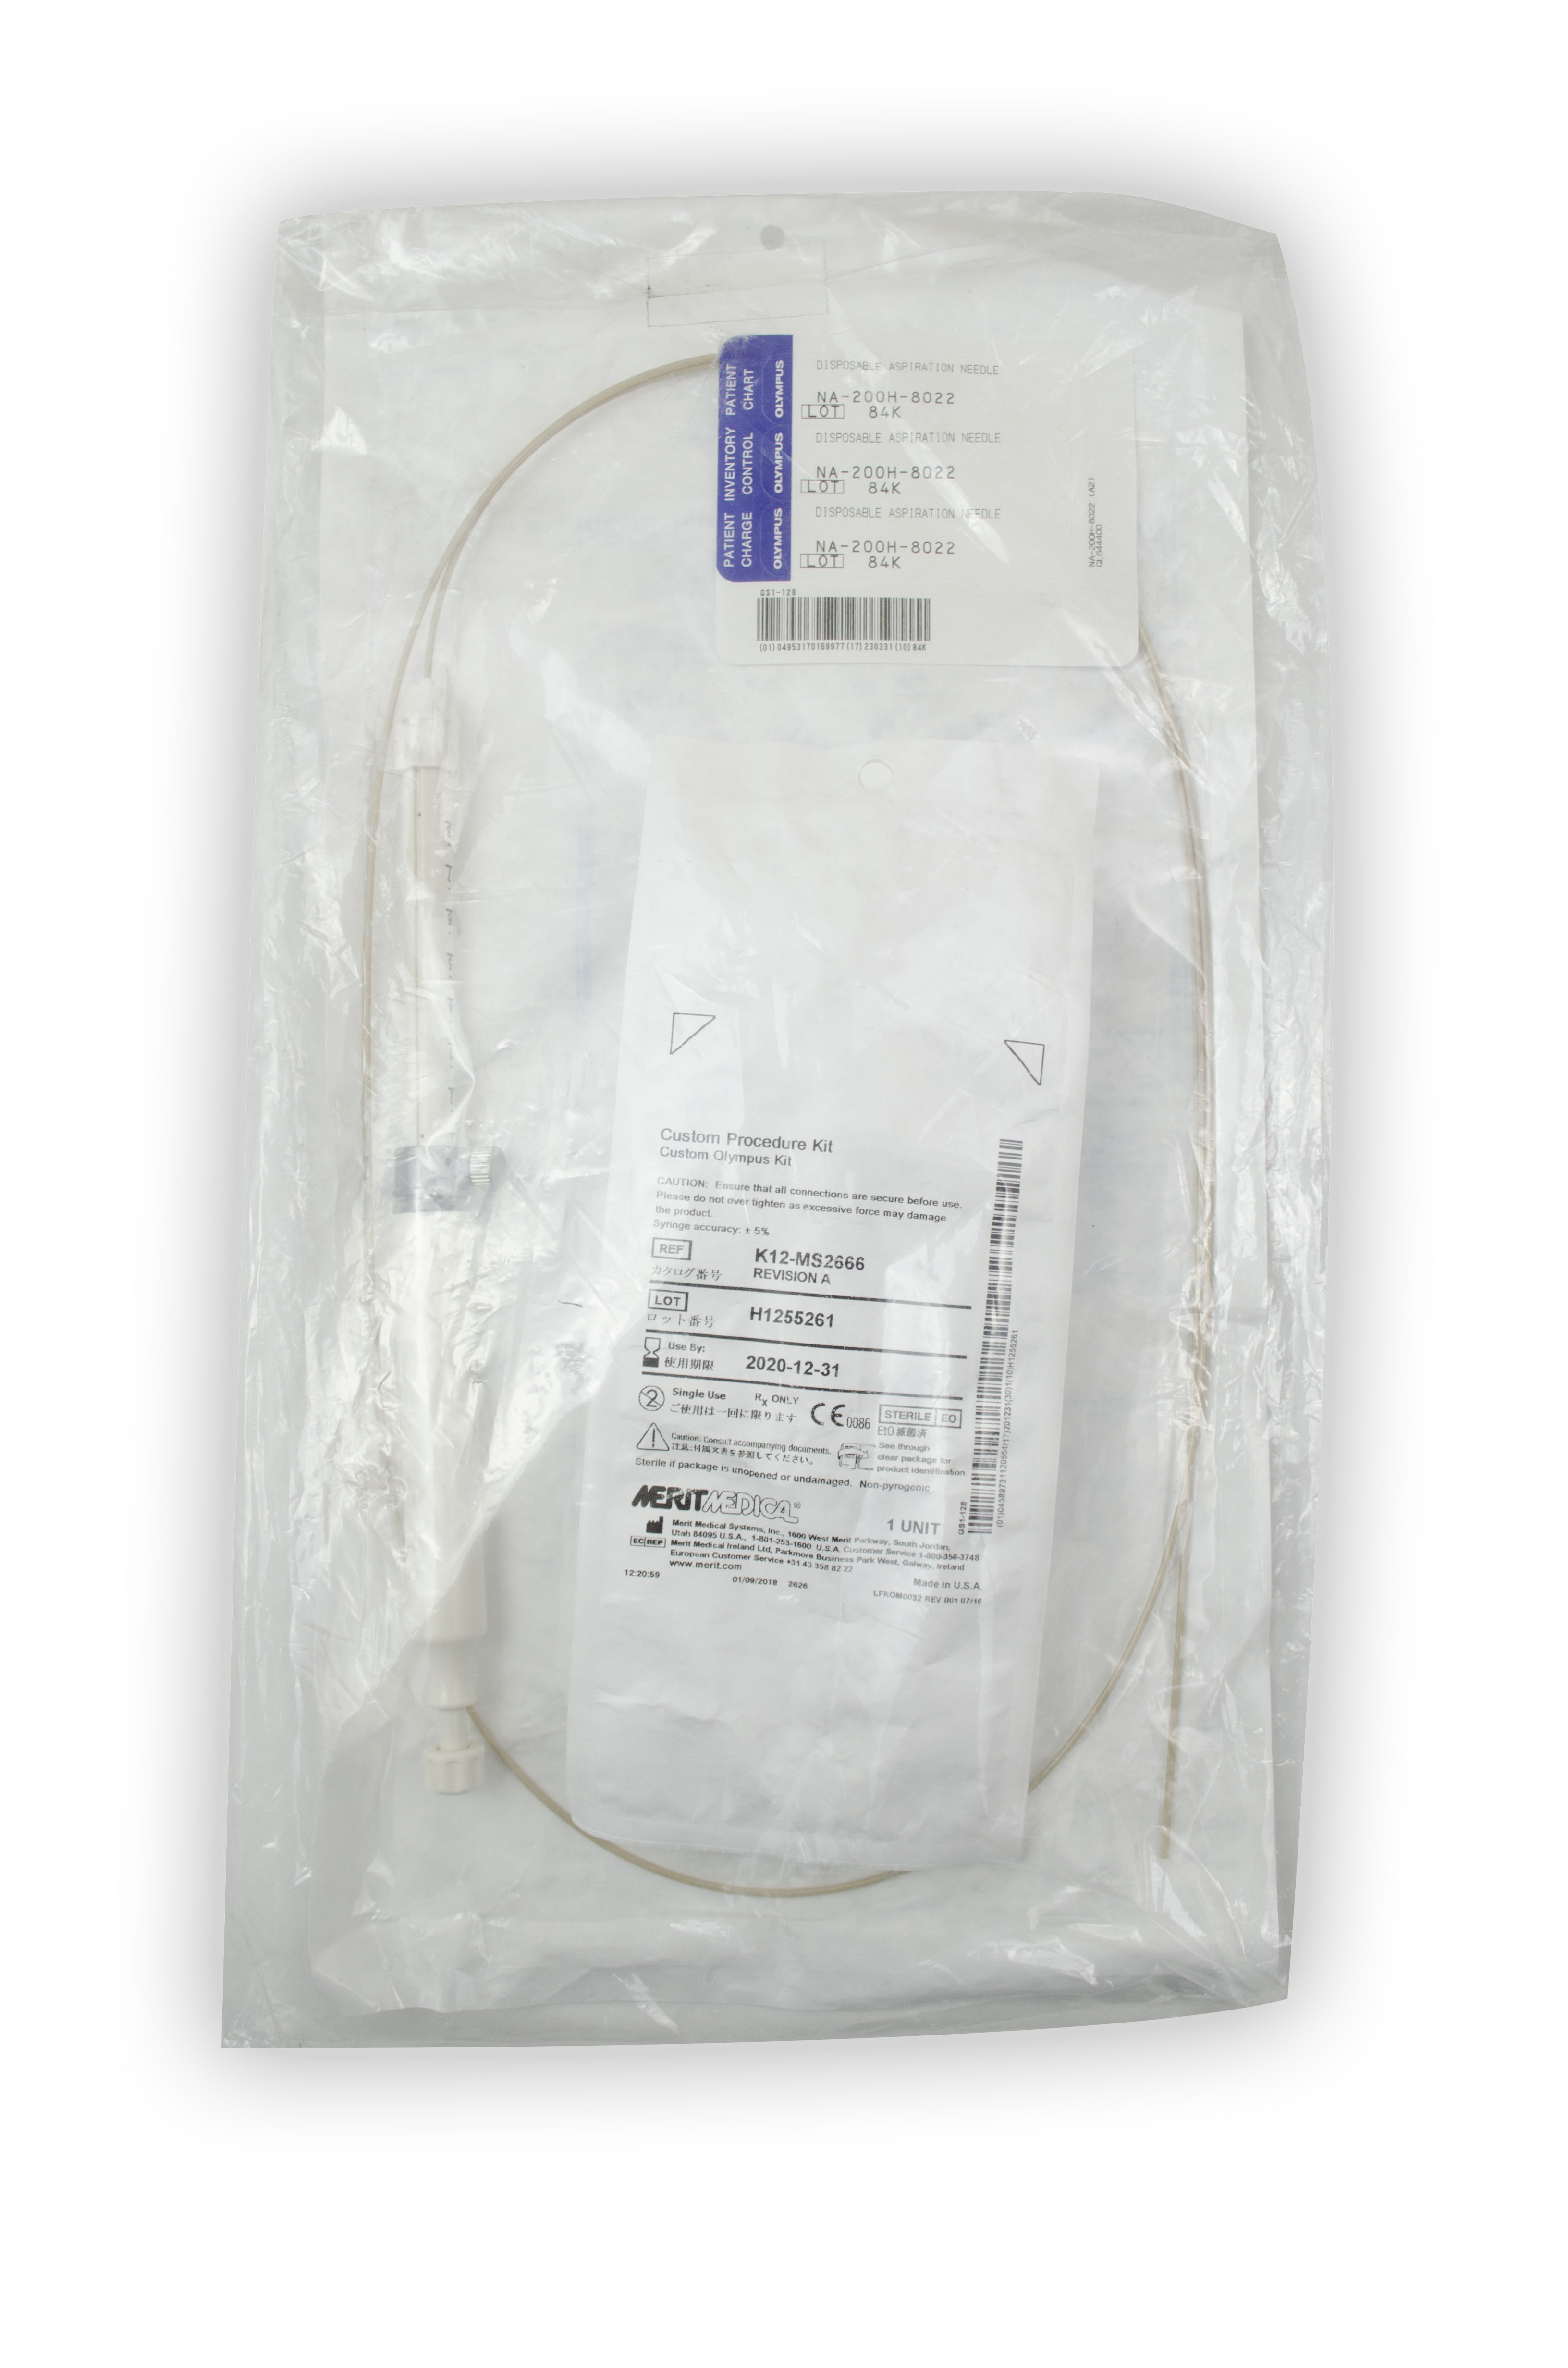 [In-Date] Olympus Disposable Aspiration Needle (2.8 mm x 1400 mm) - NA-200H-8022 (Original Packaging)